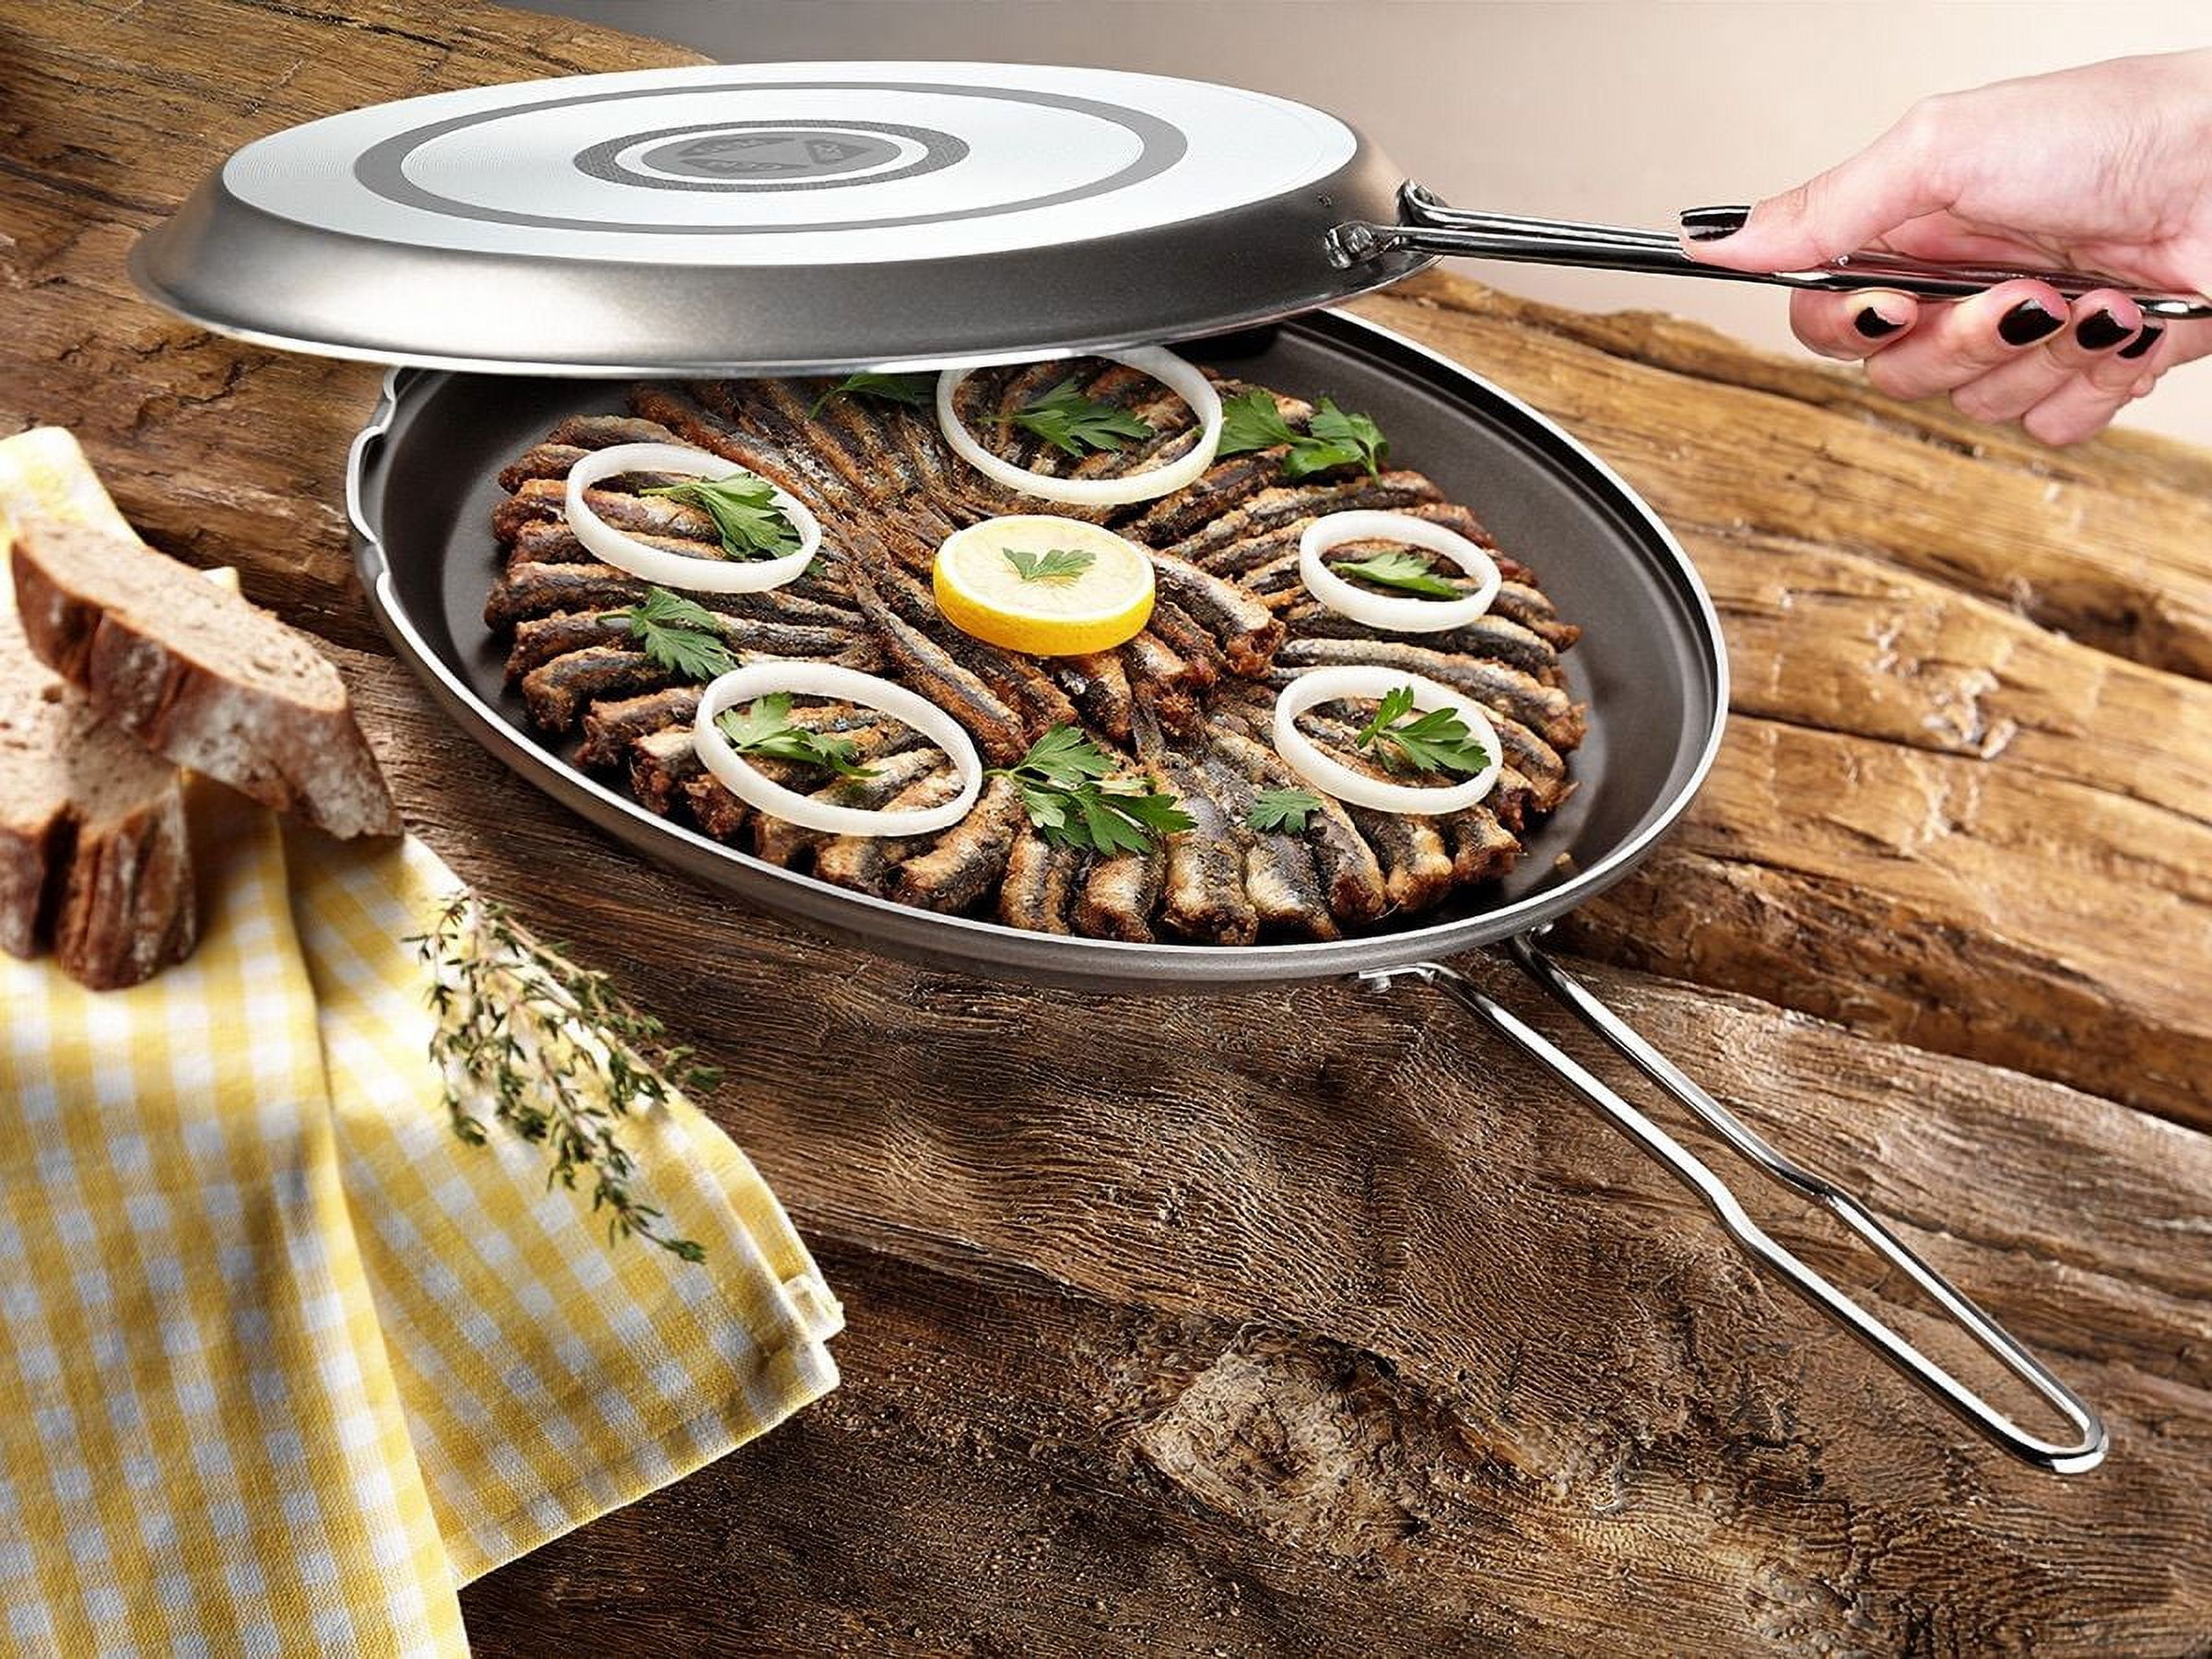 Pizza Grill Pan 12″ w/ Removable Handle Perforated Non-Stick BBQ Grilling  Dish